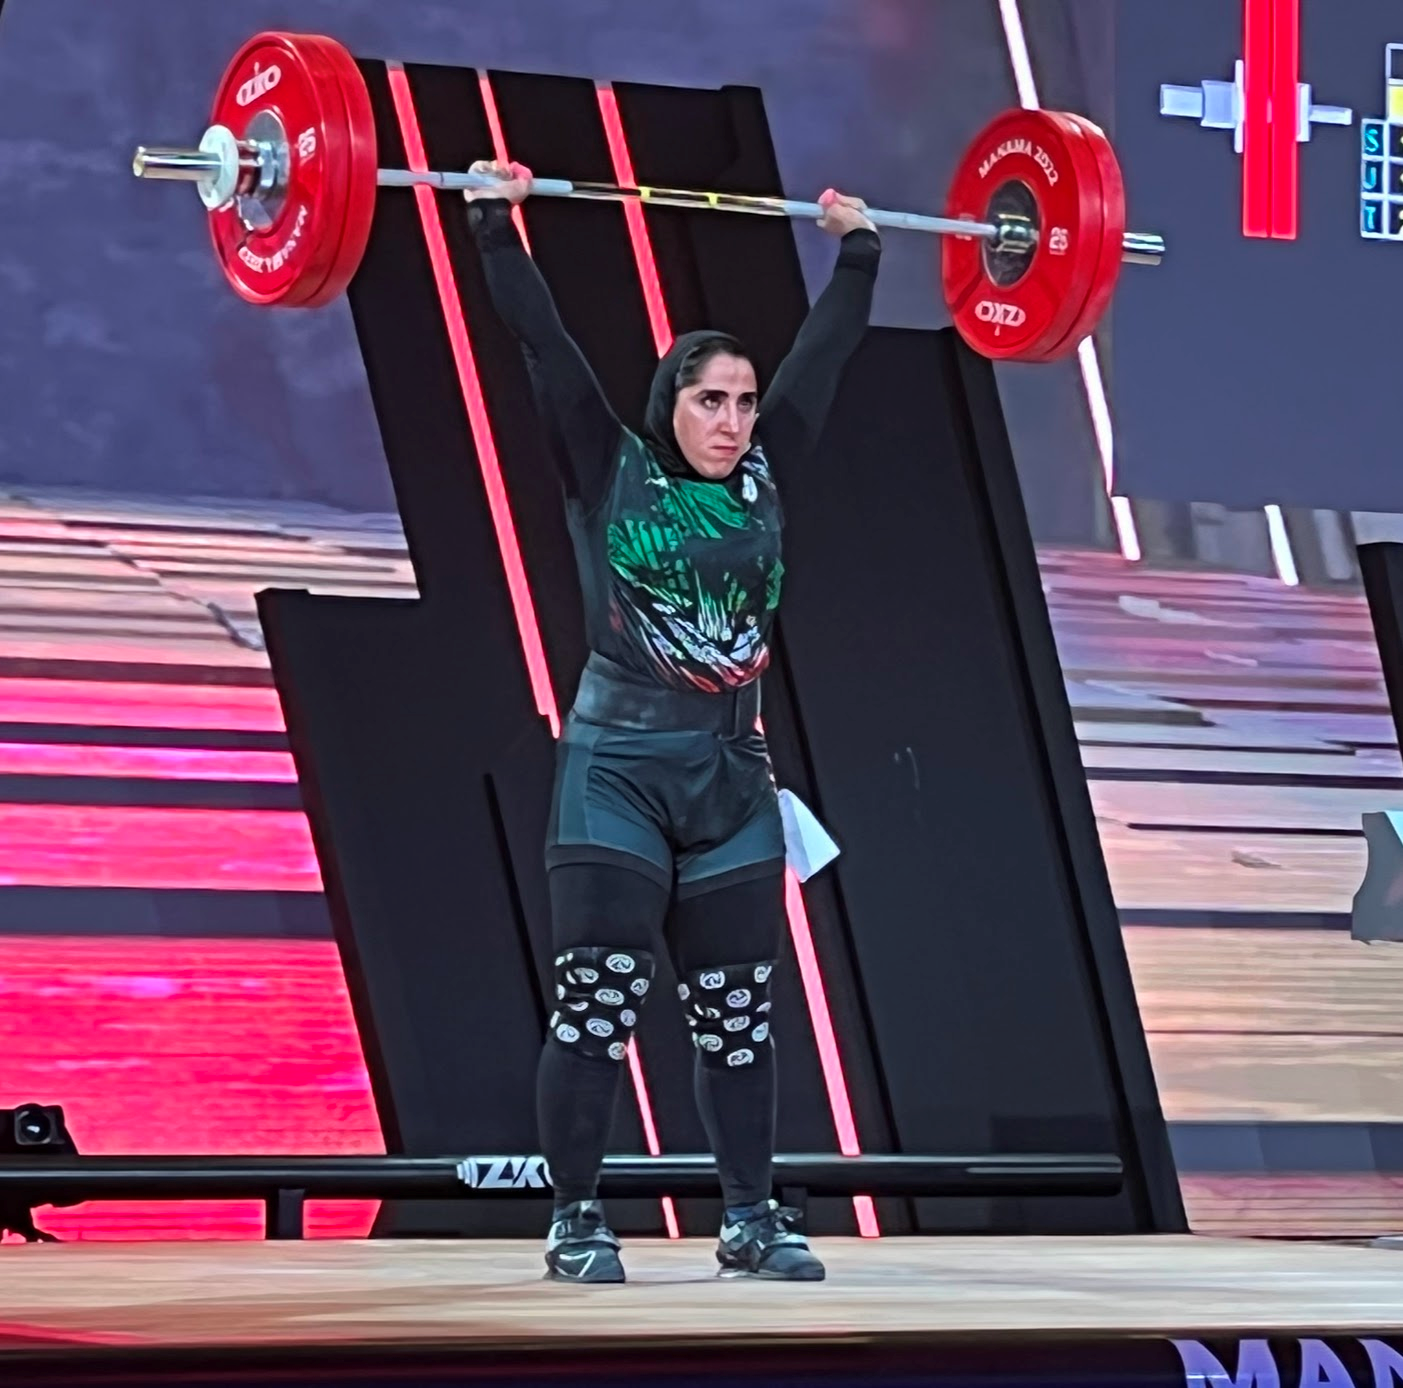 Seyyedeh Elham Hosseini became Iran's first female continental champion at the Asian Weightlifting Championships today ©Brian Oliver